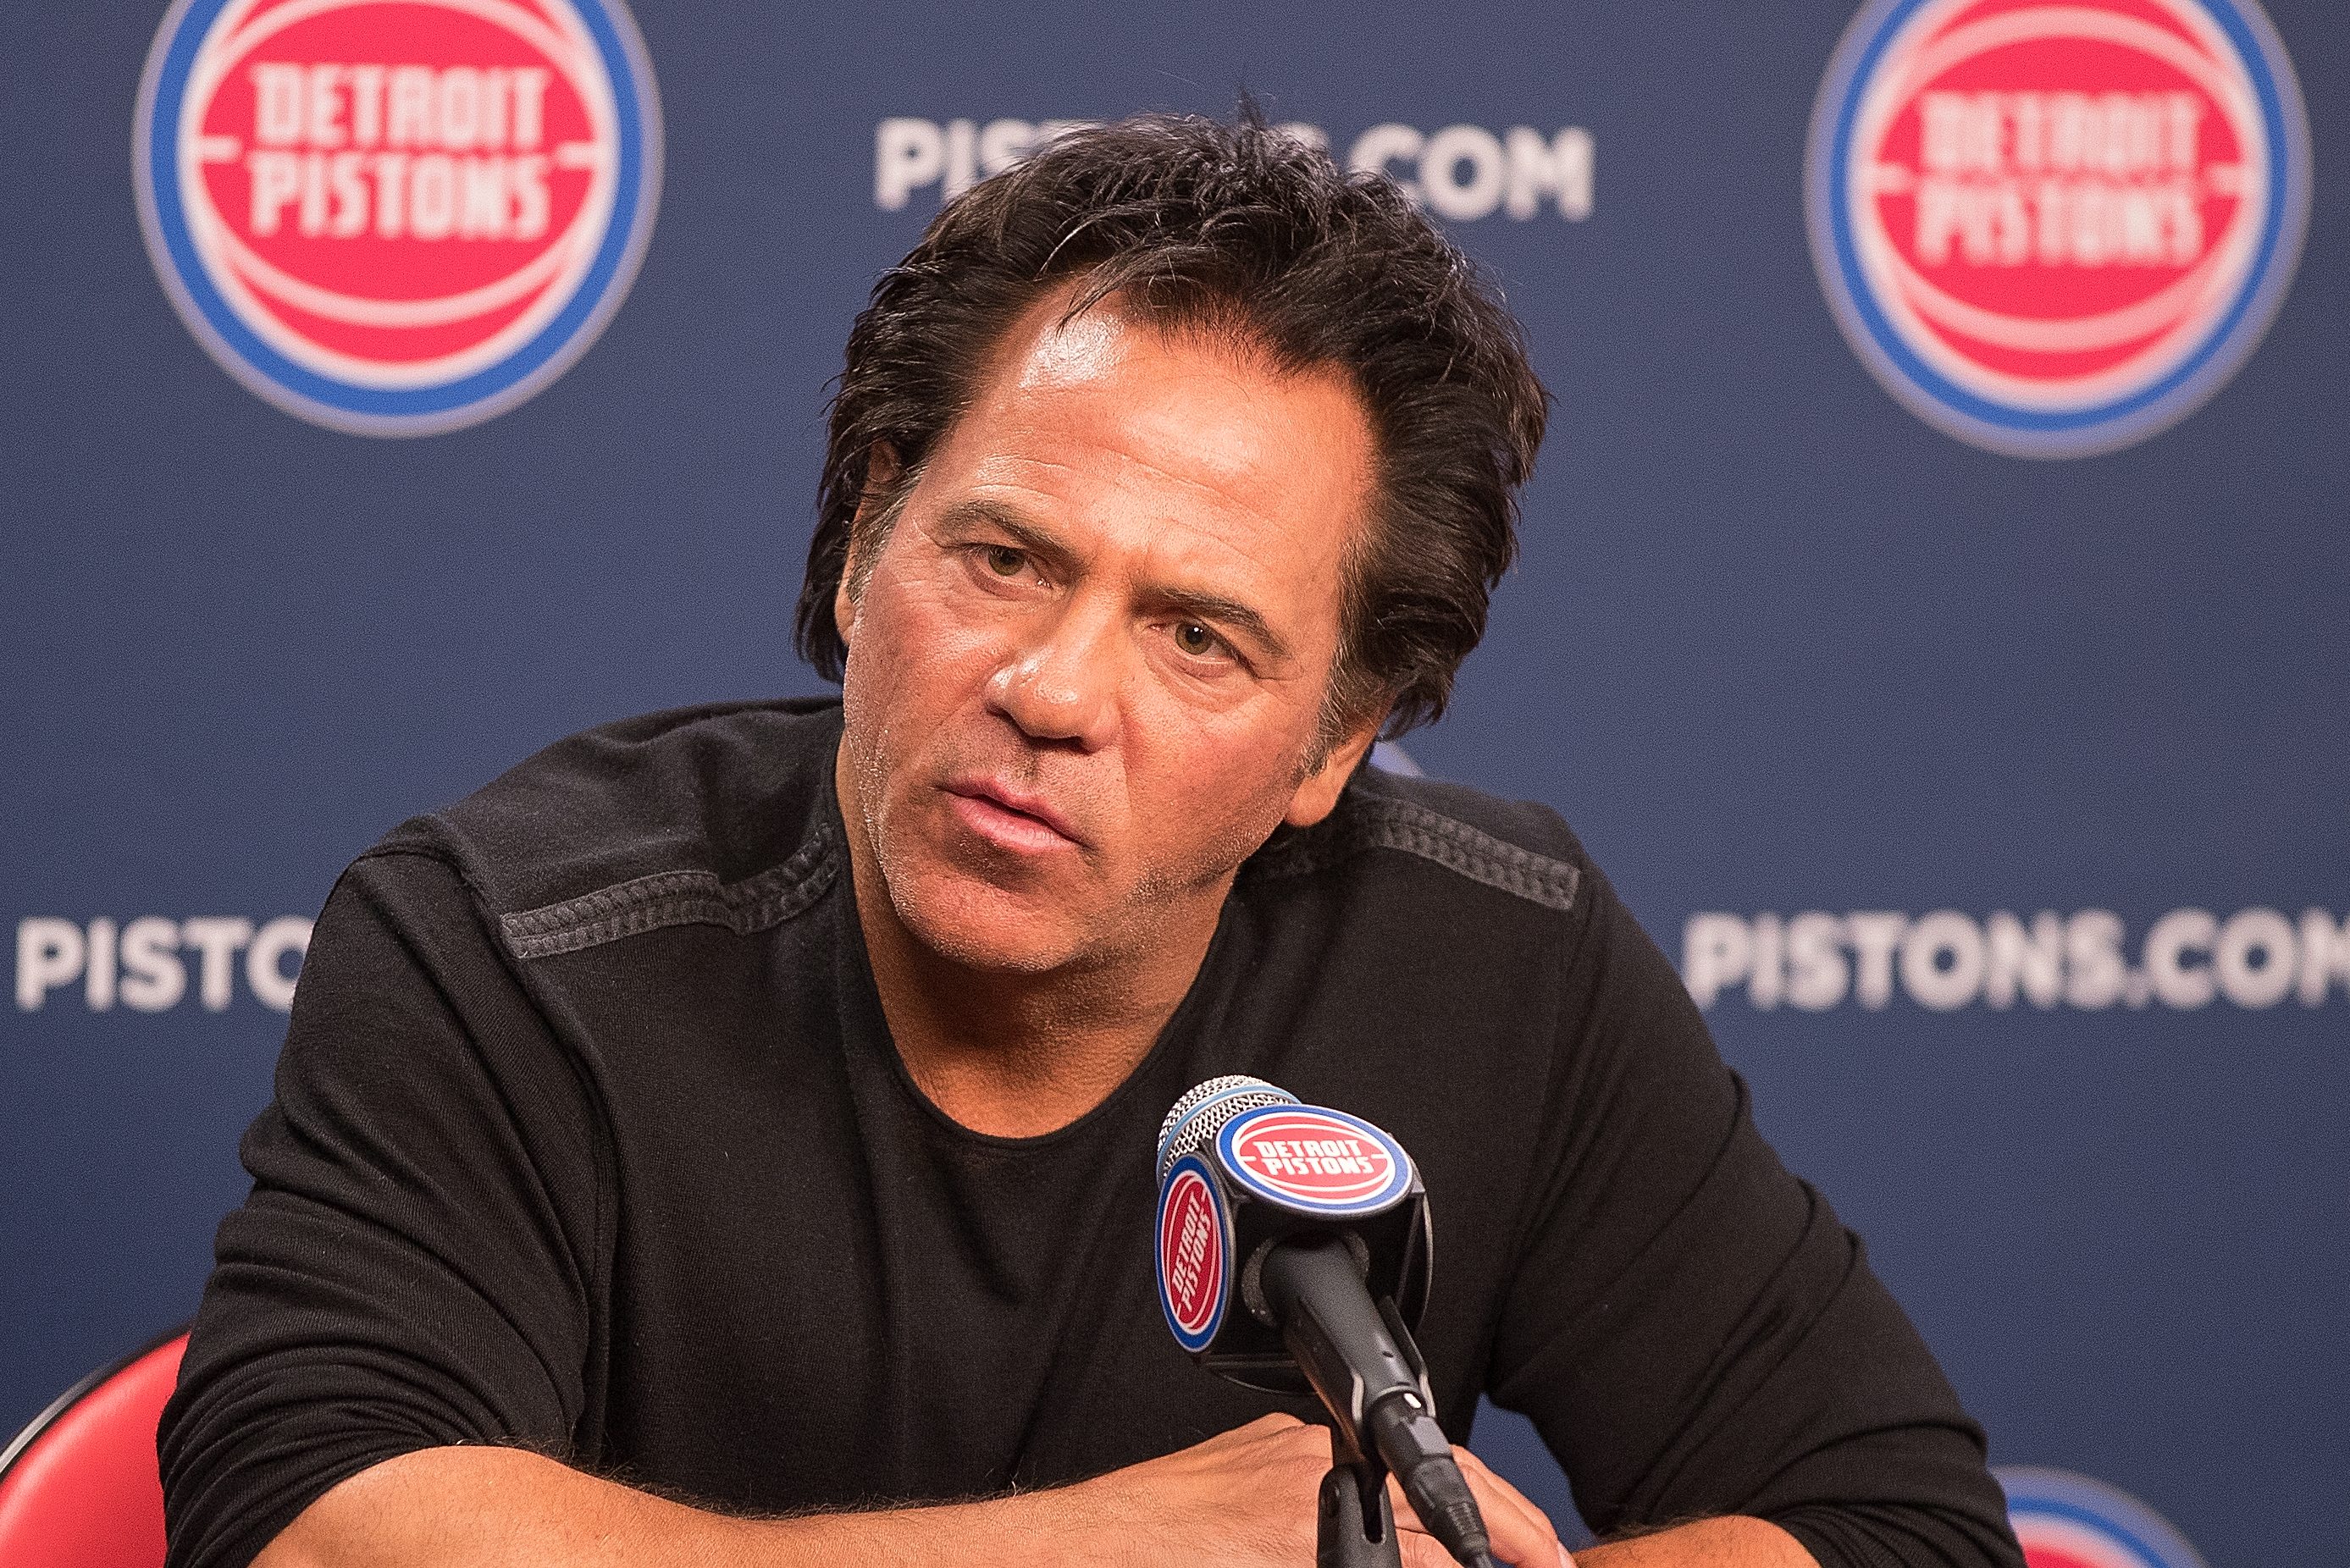 Activists Call on NBA to Oust Pistons Owner Tom Gores Over Ties to Prison Business